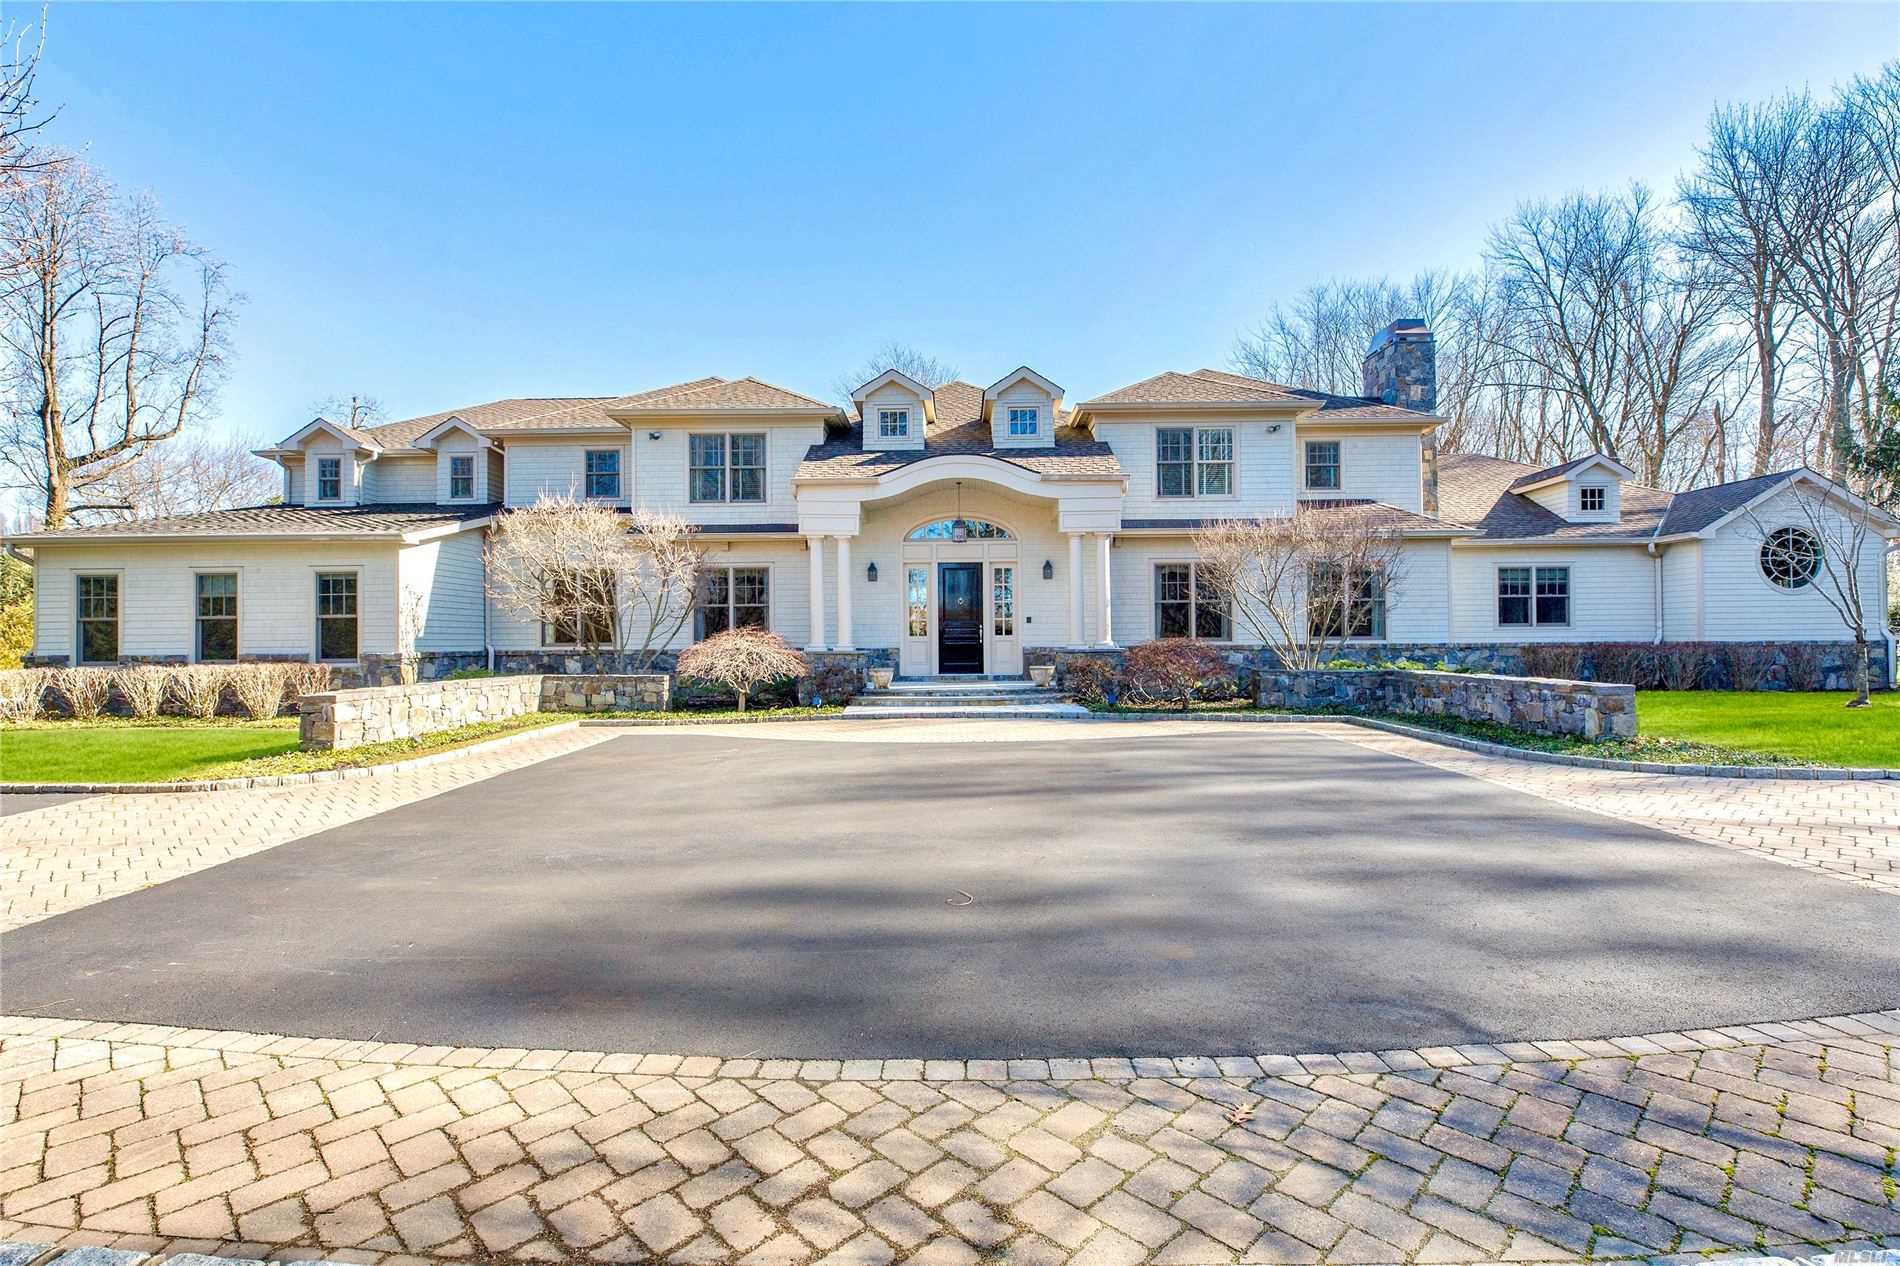 6 Harriman Drive is an architectural gem in the prestigious Village of Sands Point. Situated on 2+ acres of park-like property, this beautiful New England style colonial features a private driveway, in-ground pool, Har-Tru tennis court, multiple outdoor entertaining areas and more.